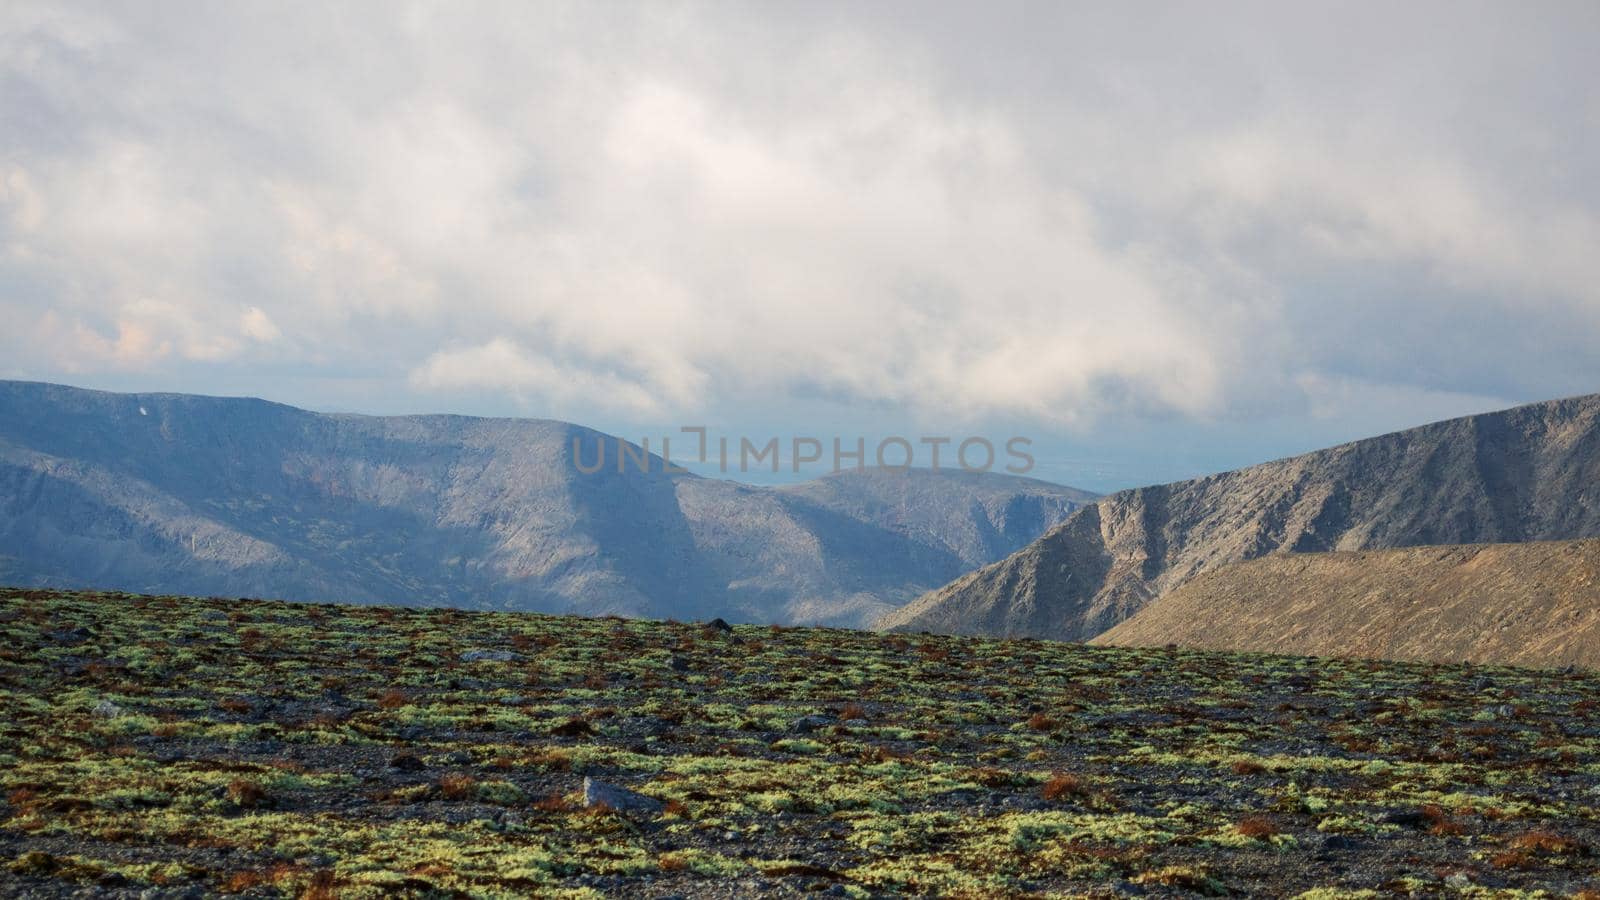 Autumn colorful tundra on the background mountain peaks in cloudy weather. Mountain landscape in Kola Peninsula, Arctic, Khibiny Mountains.